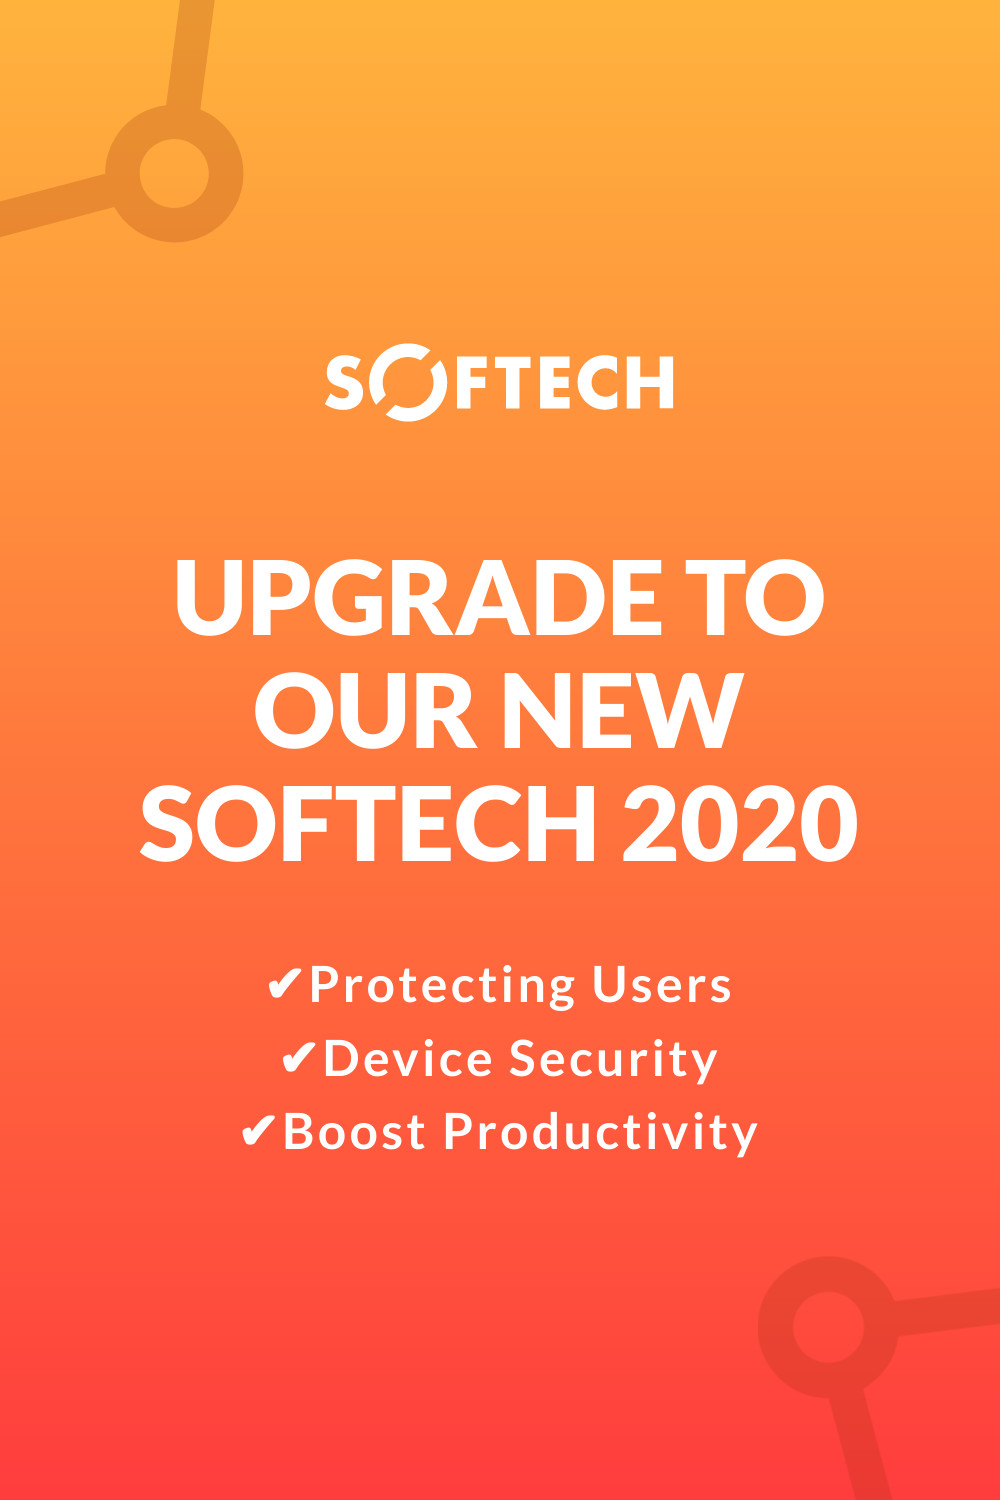 Upgrade to New Softech 2020 Inline Rectangle 300x250